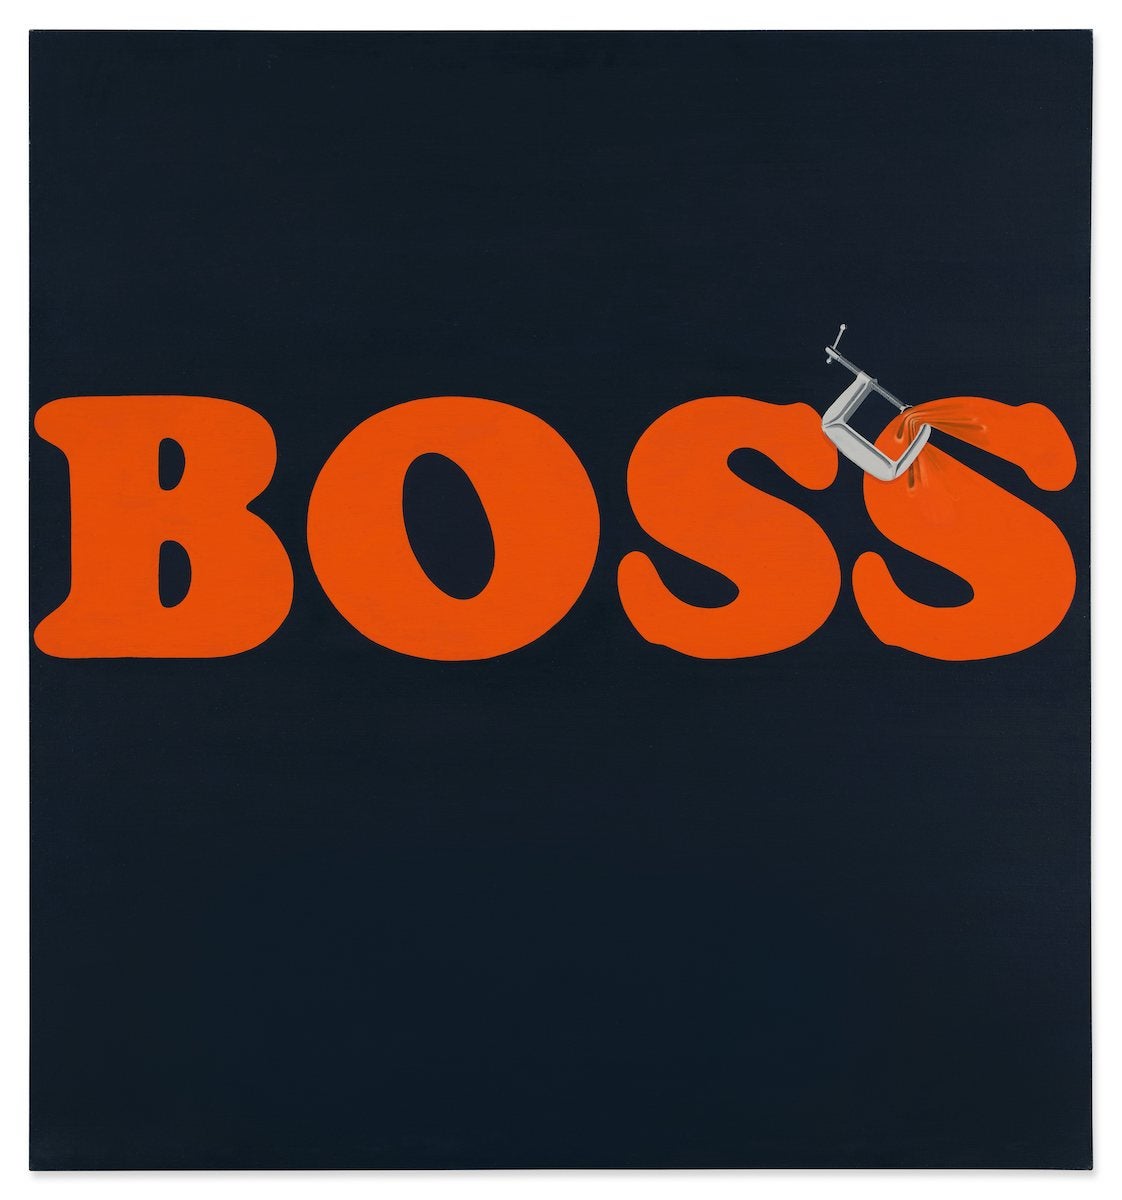 Ed Ruscha, Securing the Last Letter (Boss), 1964